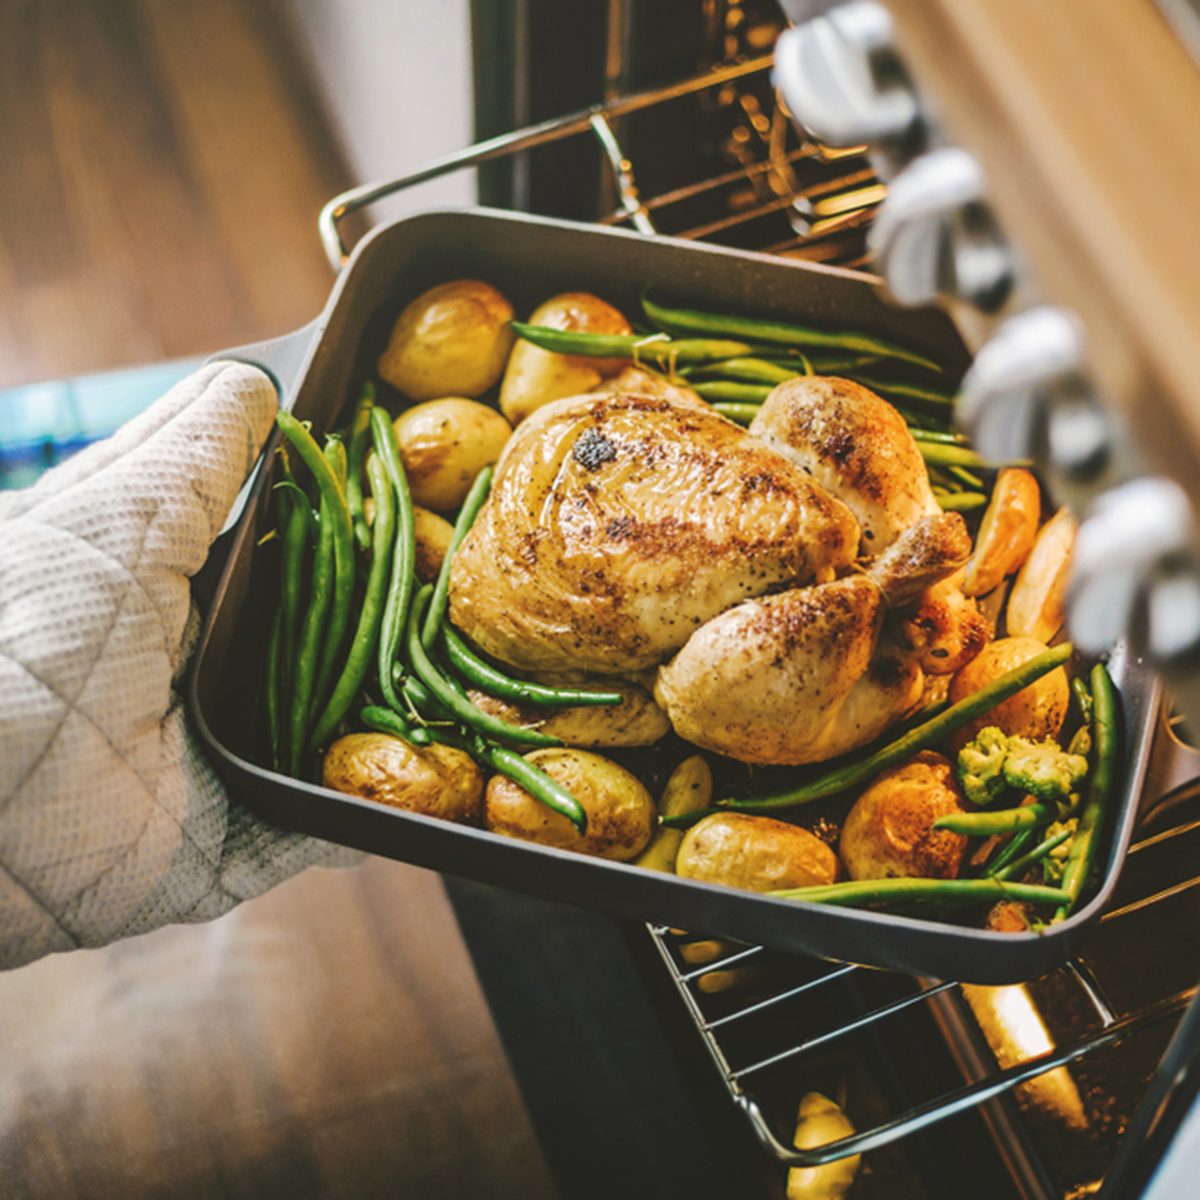 10 Mistakes You're Making With Your Broiler